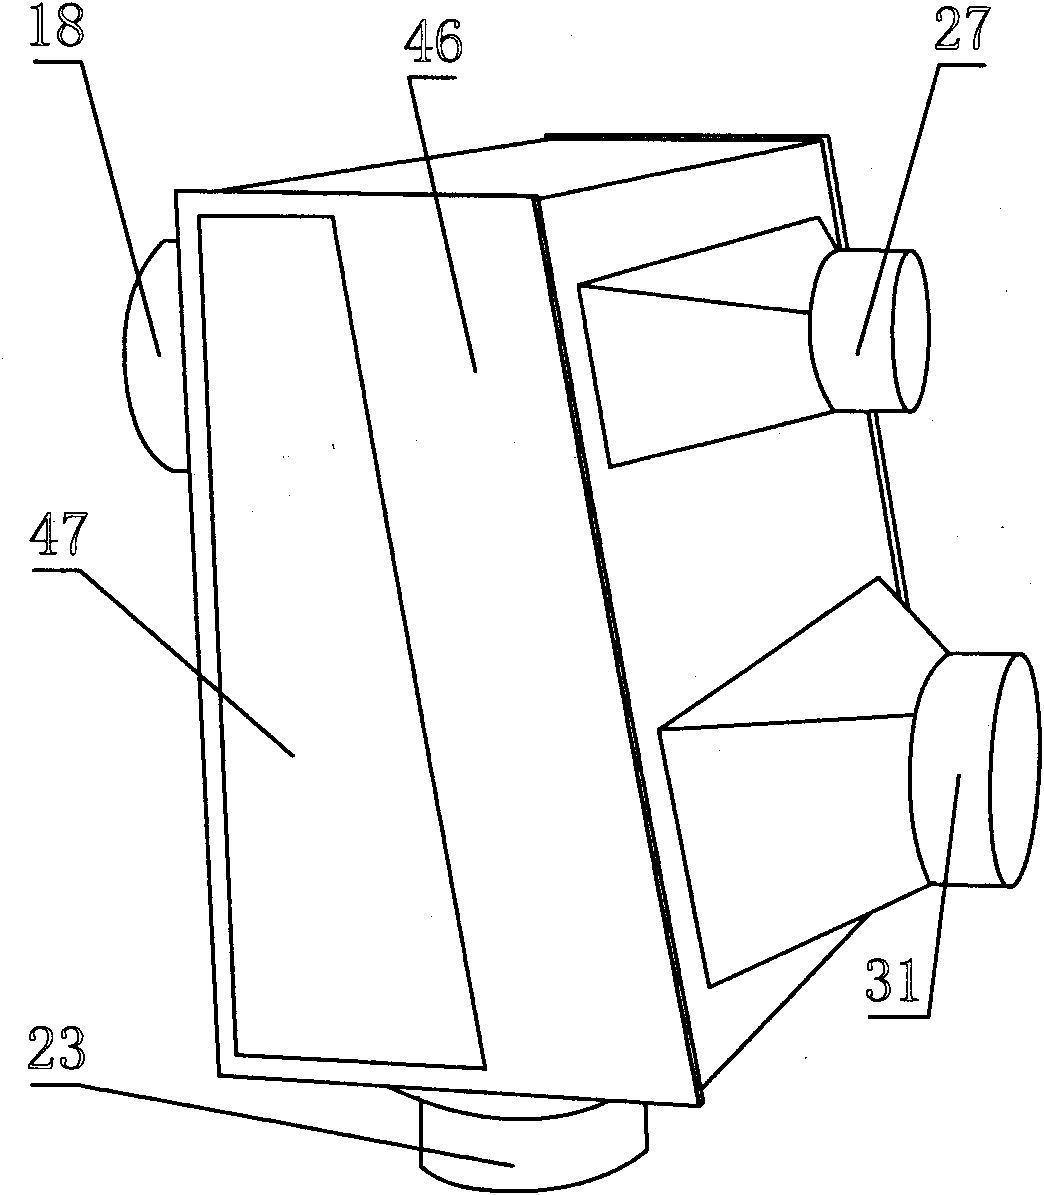 Air flow screening device for micron-sized powder materials